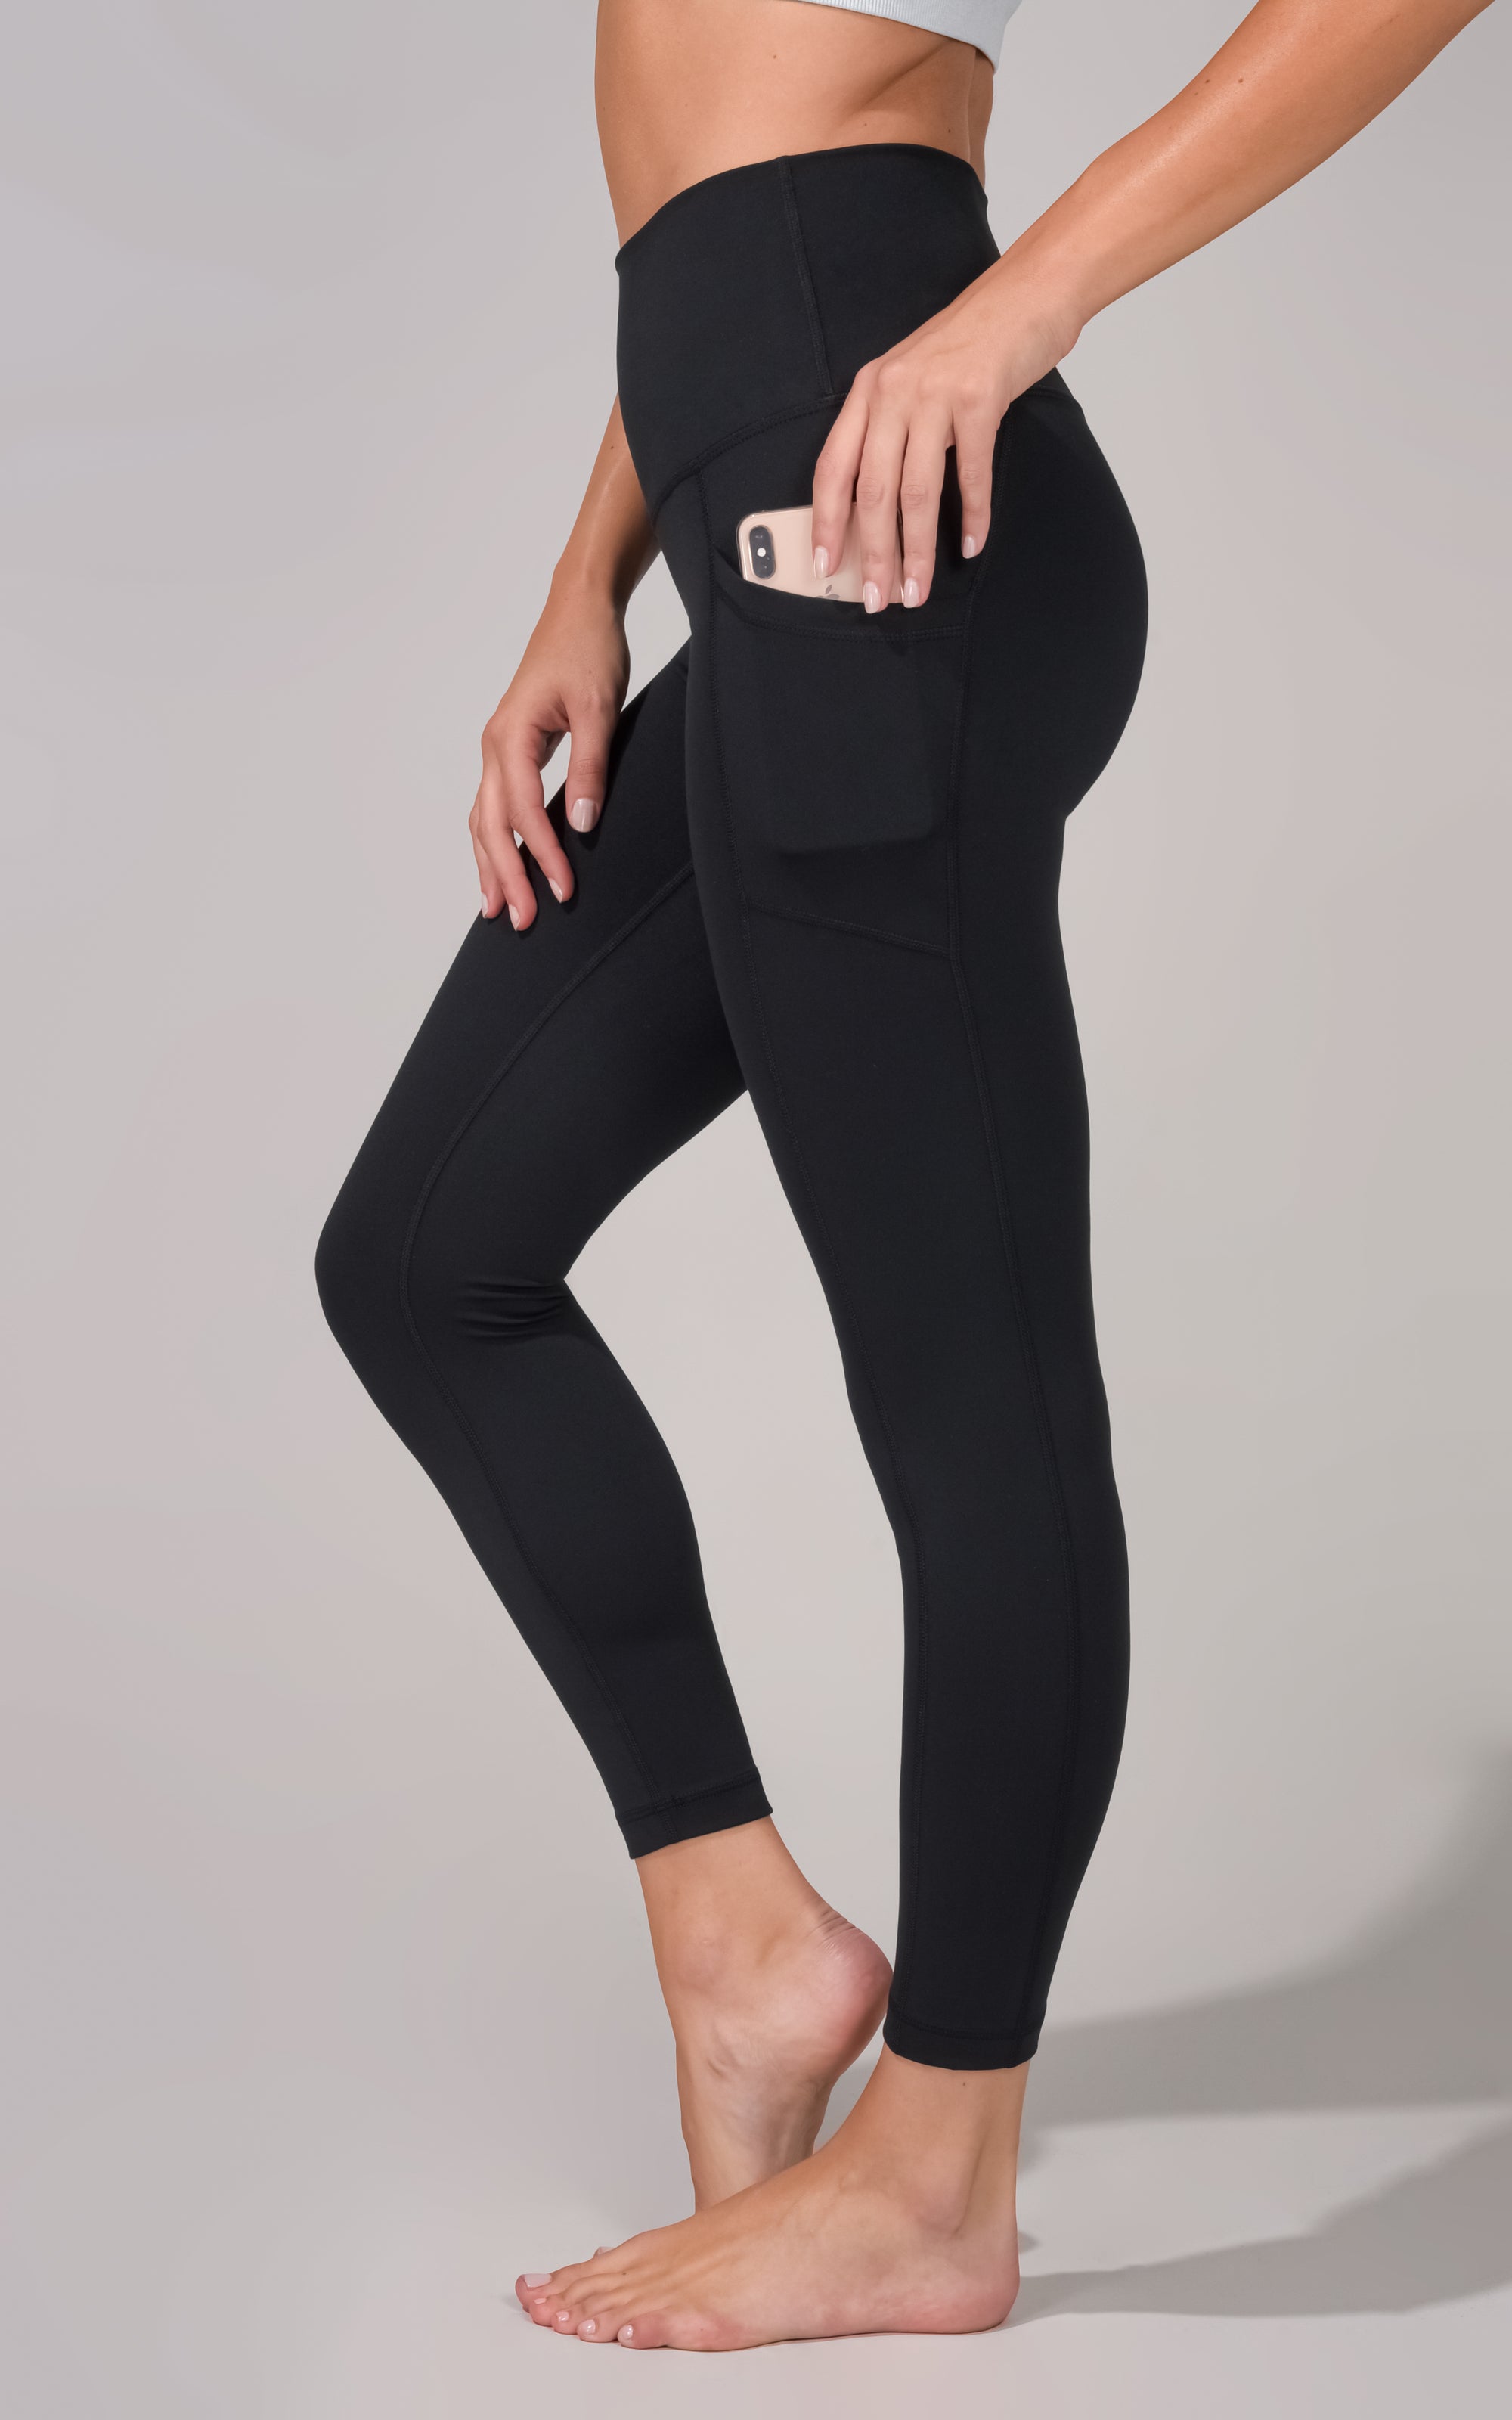 90 Degree by Reflex 90 Degree By Reflex Super High Waist Elastic Free Ankle  Legging with Side Pocket - Rouge - XL